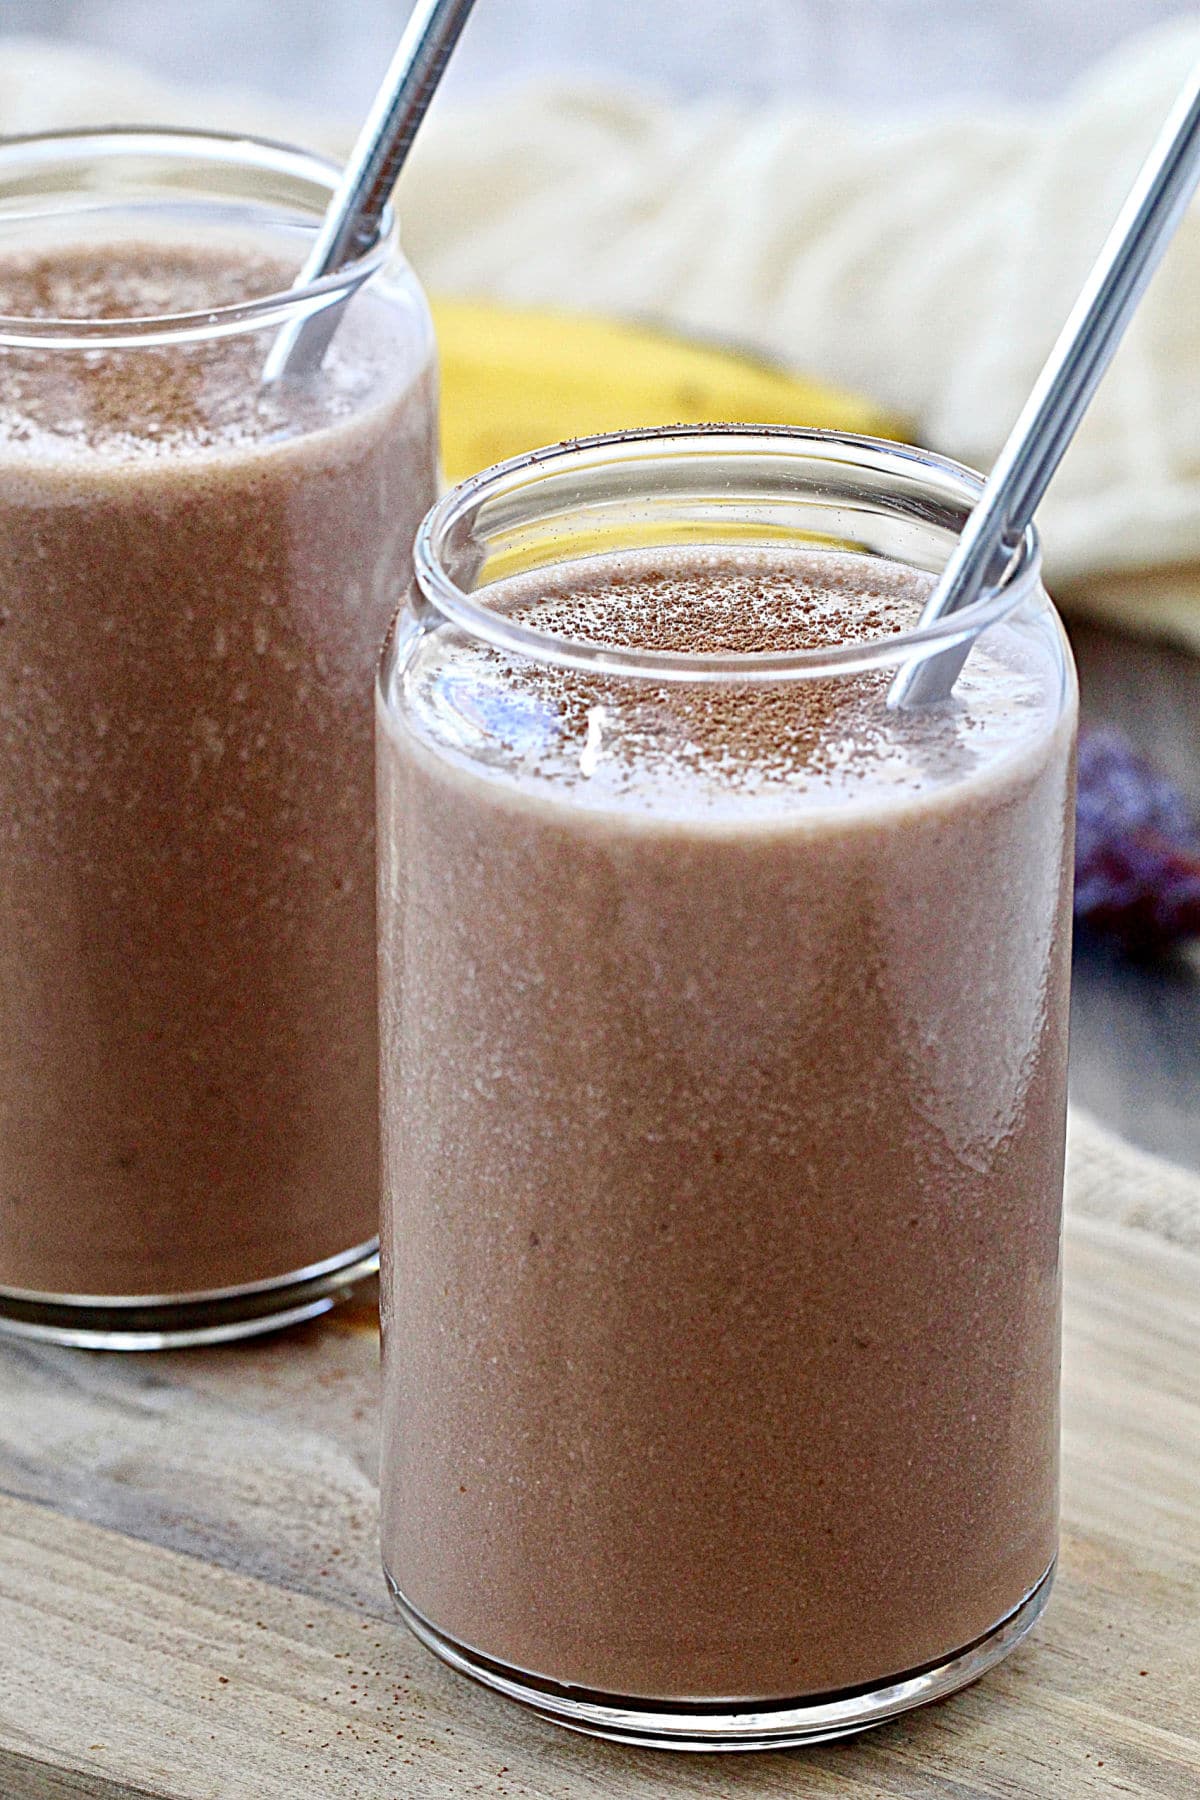 Two healthy chocolate smoothies in glasses with metal straws in them.